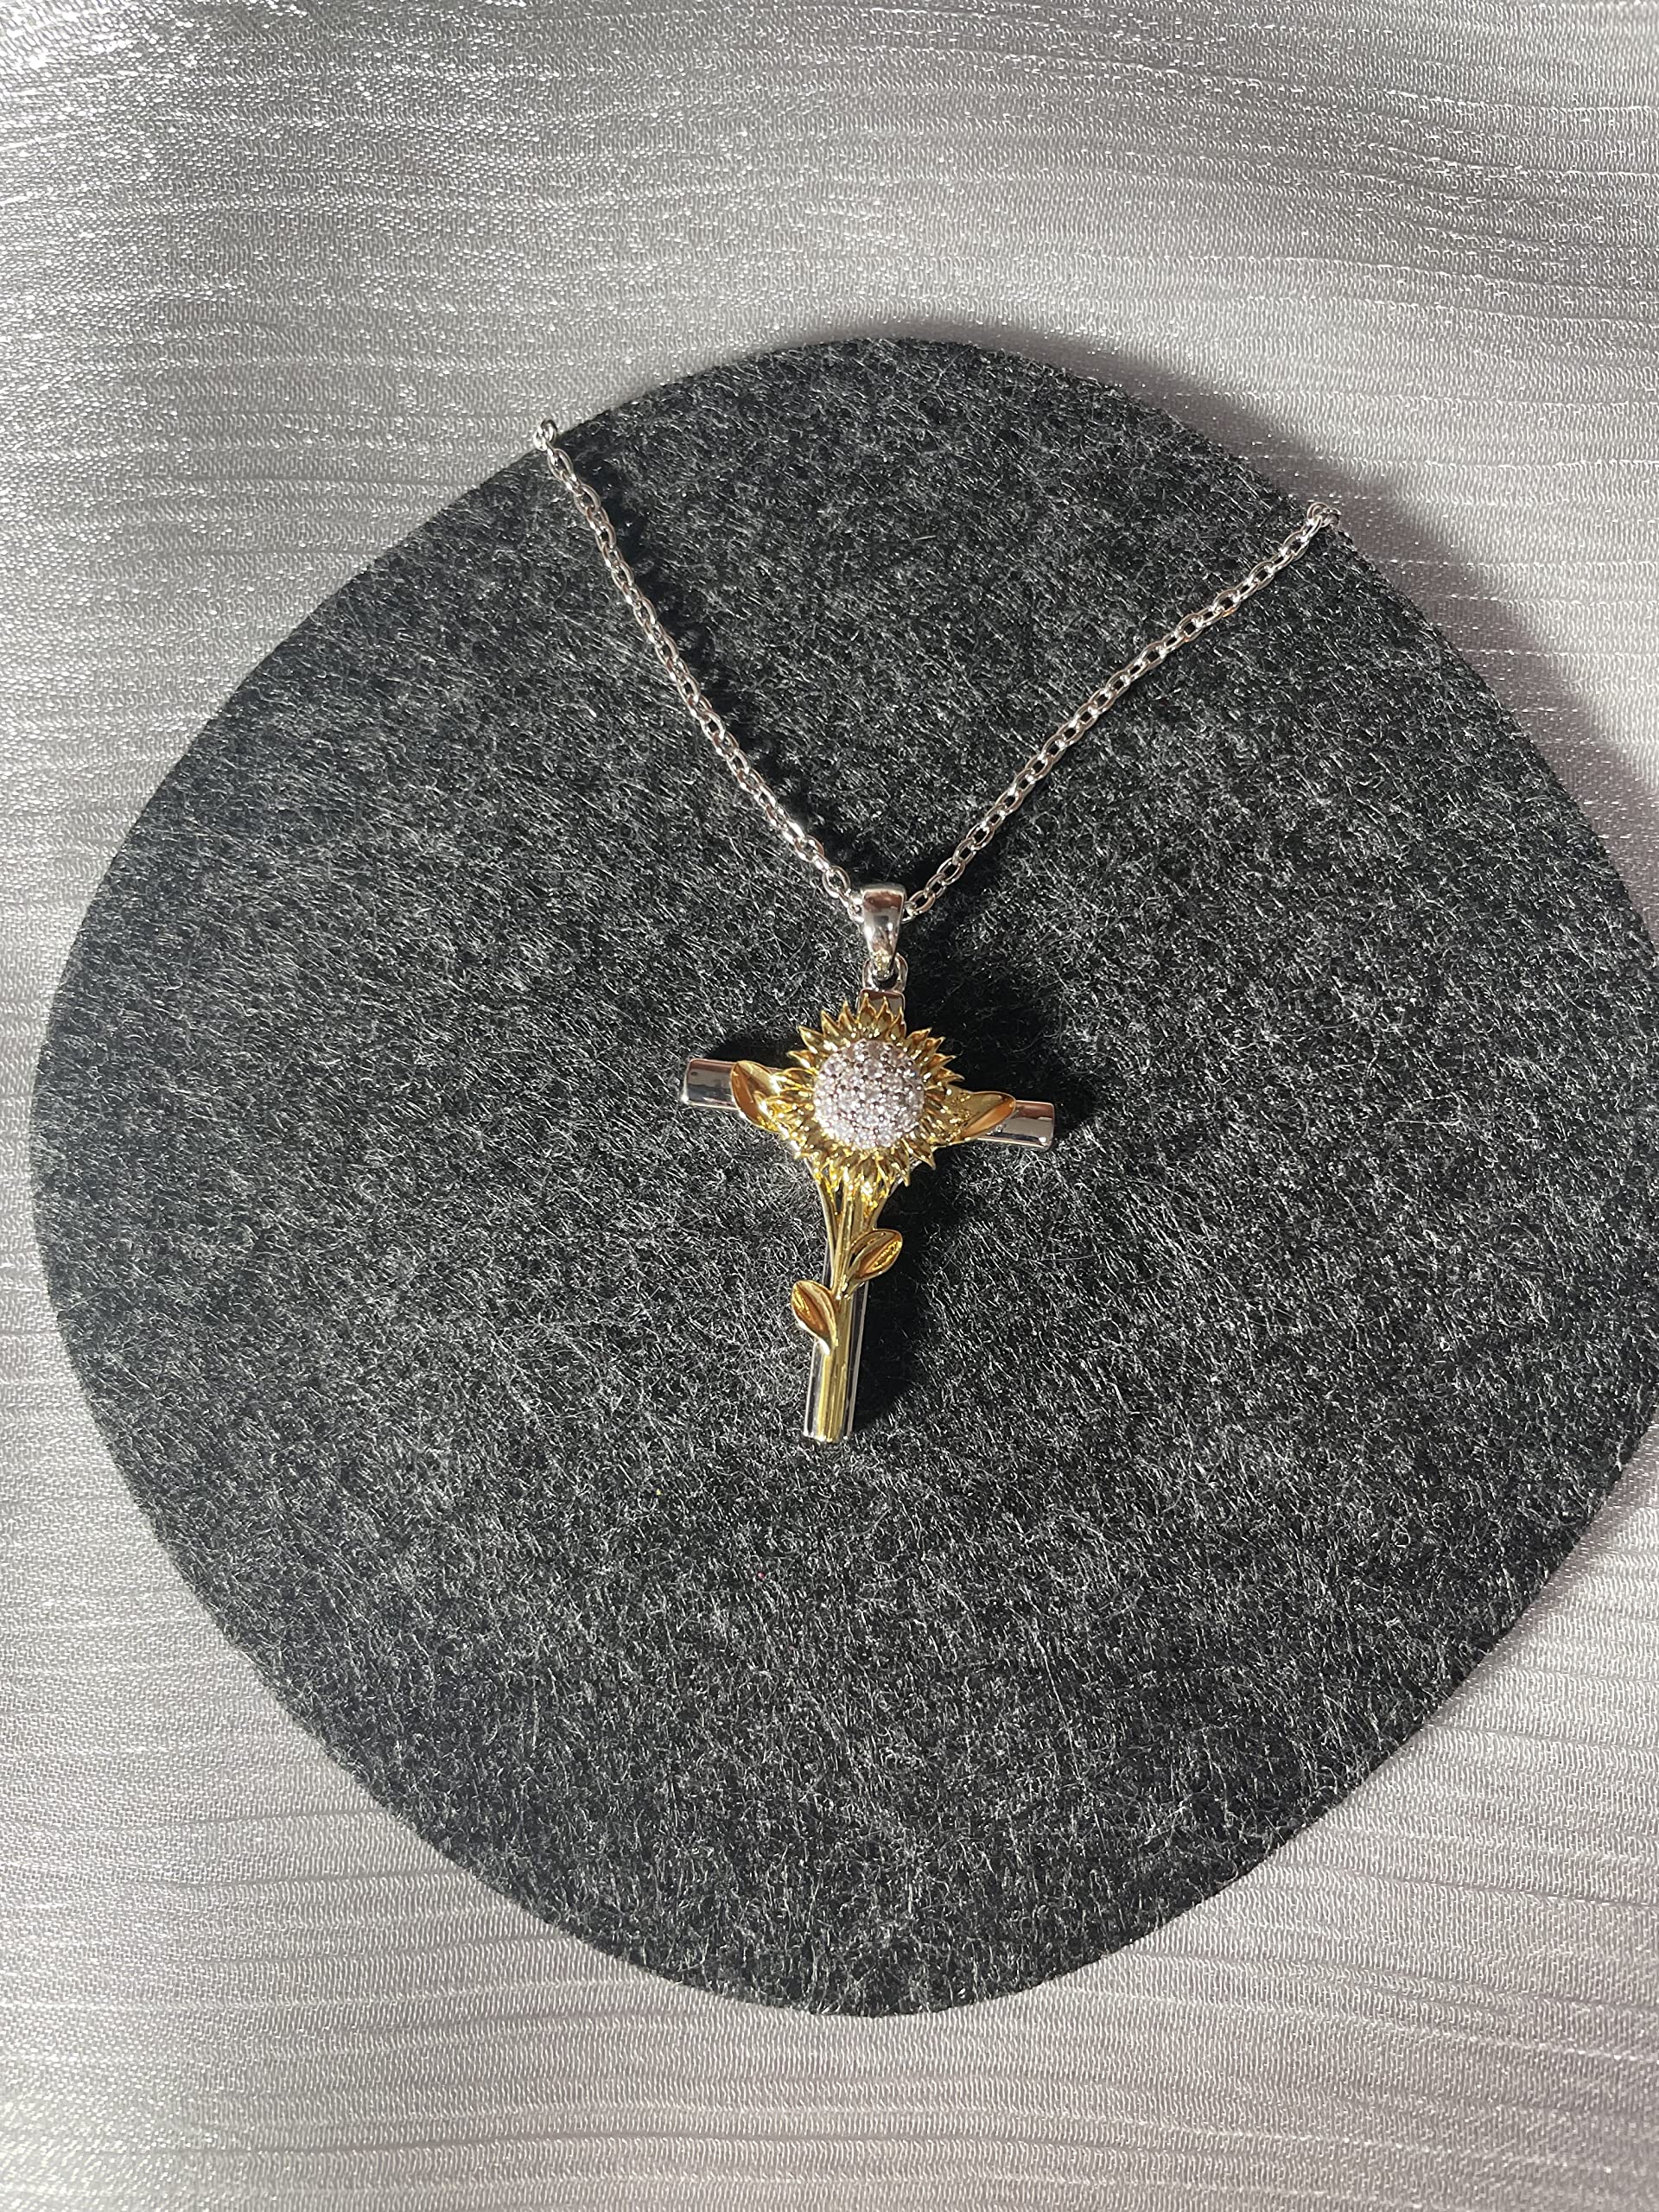 TFJS Sunflower Cross Necklace Silver 18K Gold Plated Women Men Halloween Christmas Valentine's Day Birthday Mother's Day Lady jewelry gift